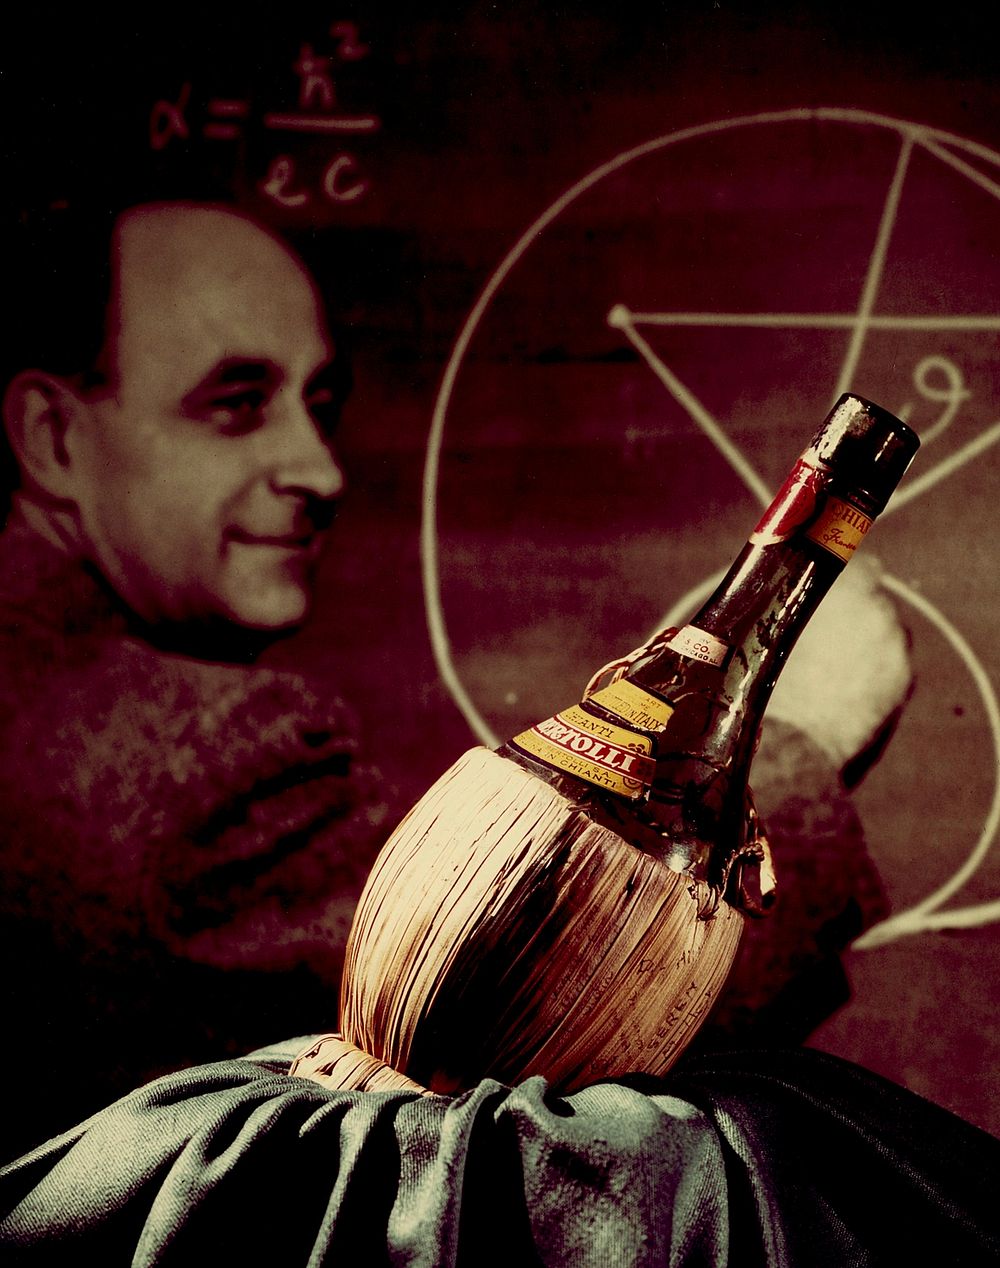 Photo montage of Fermi with the CP-1 Chianti bottle. Original public domain image from Flickr